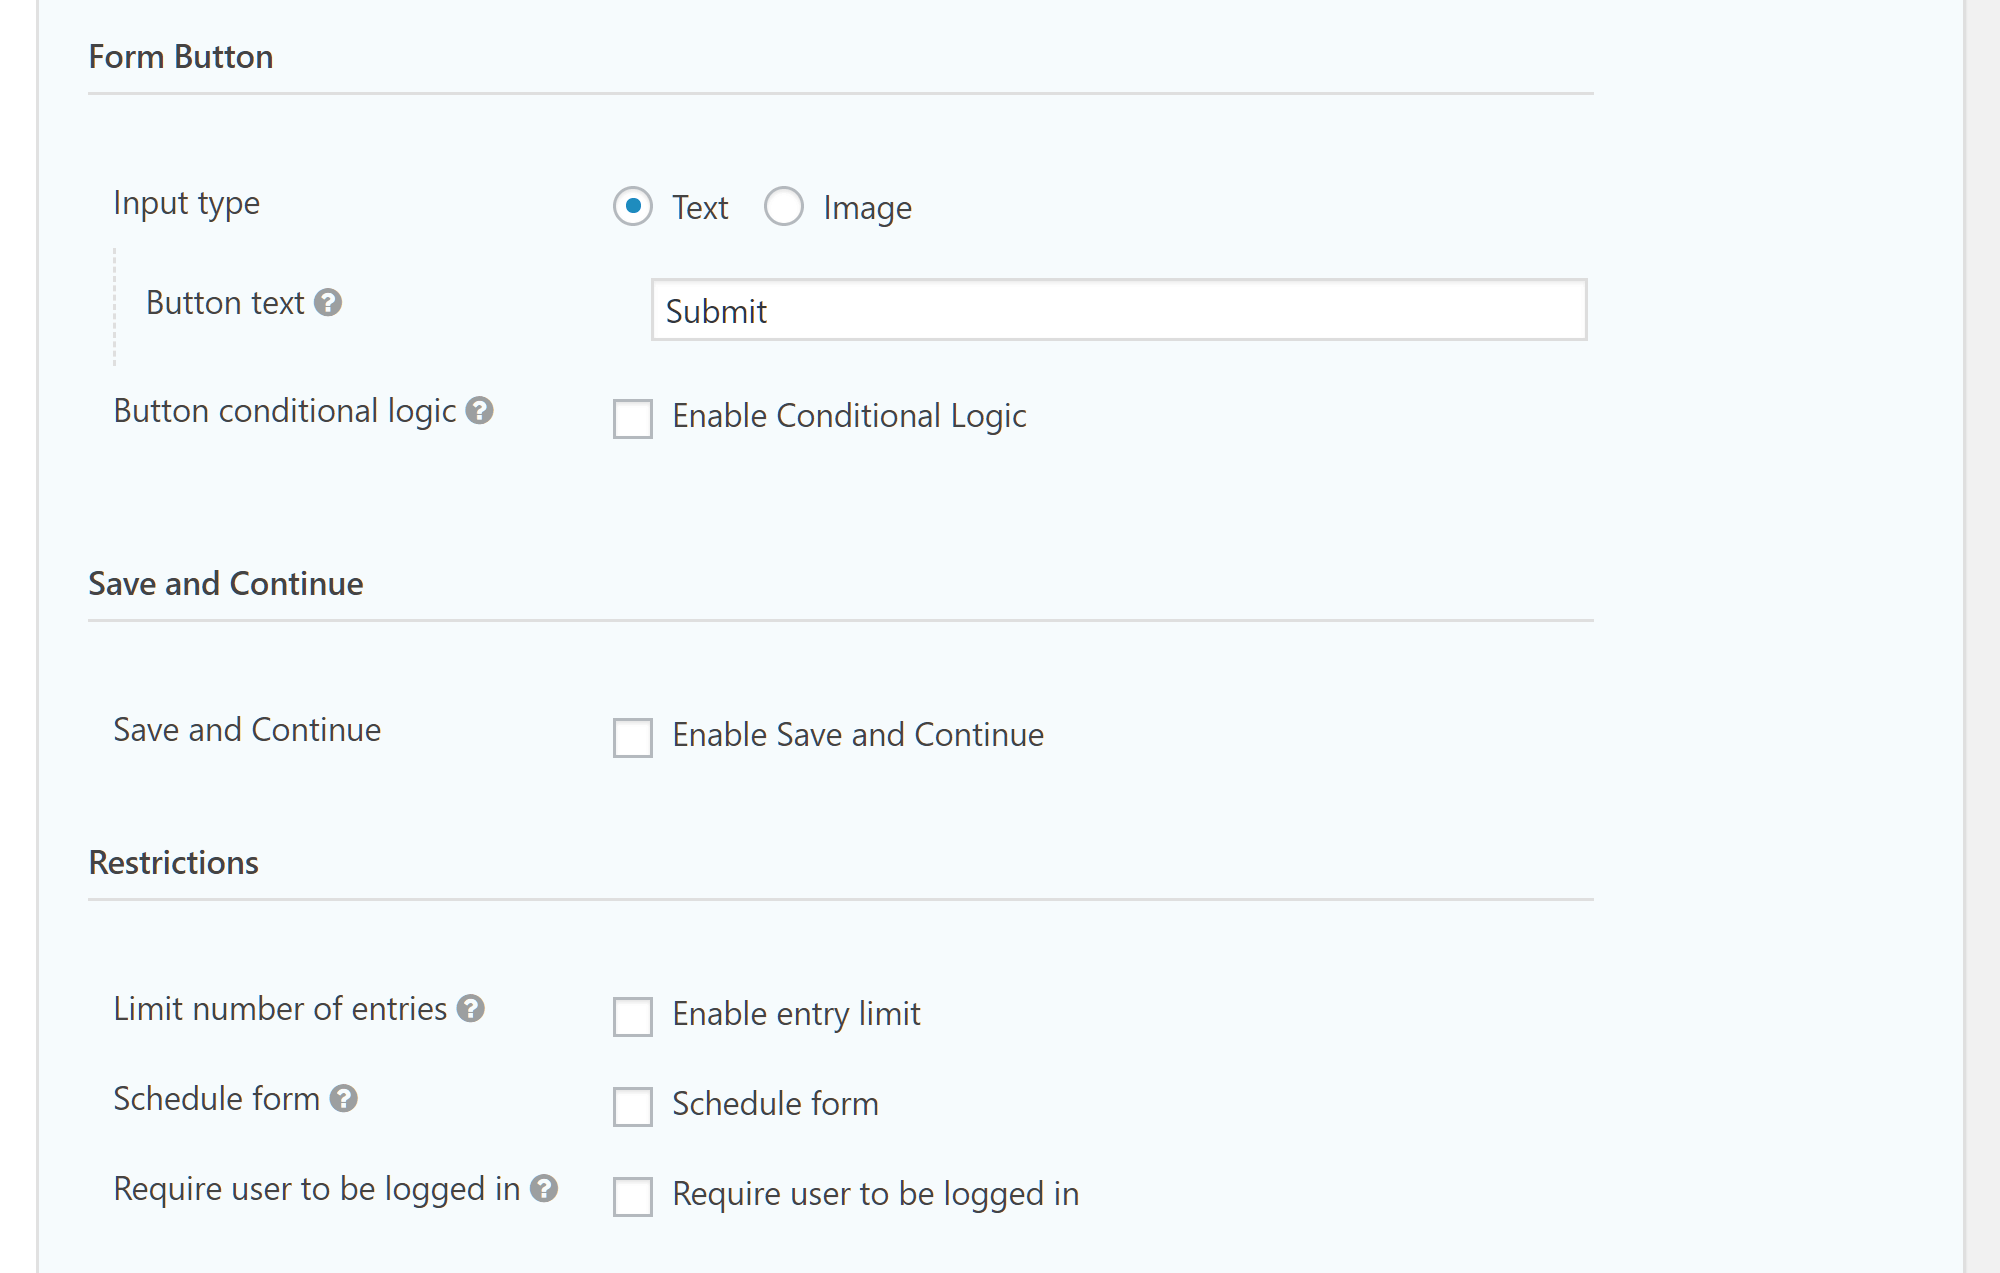 Settings for Your Form